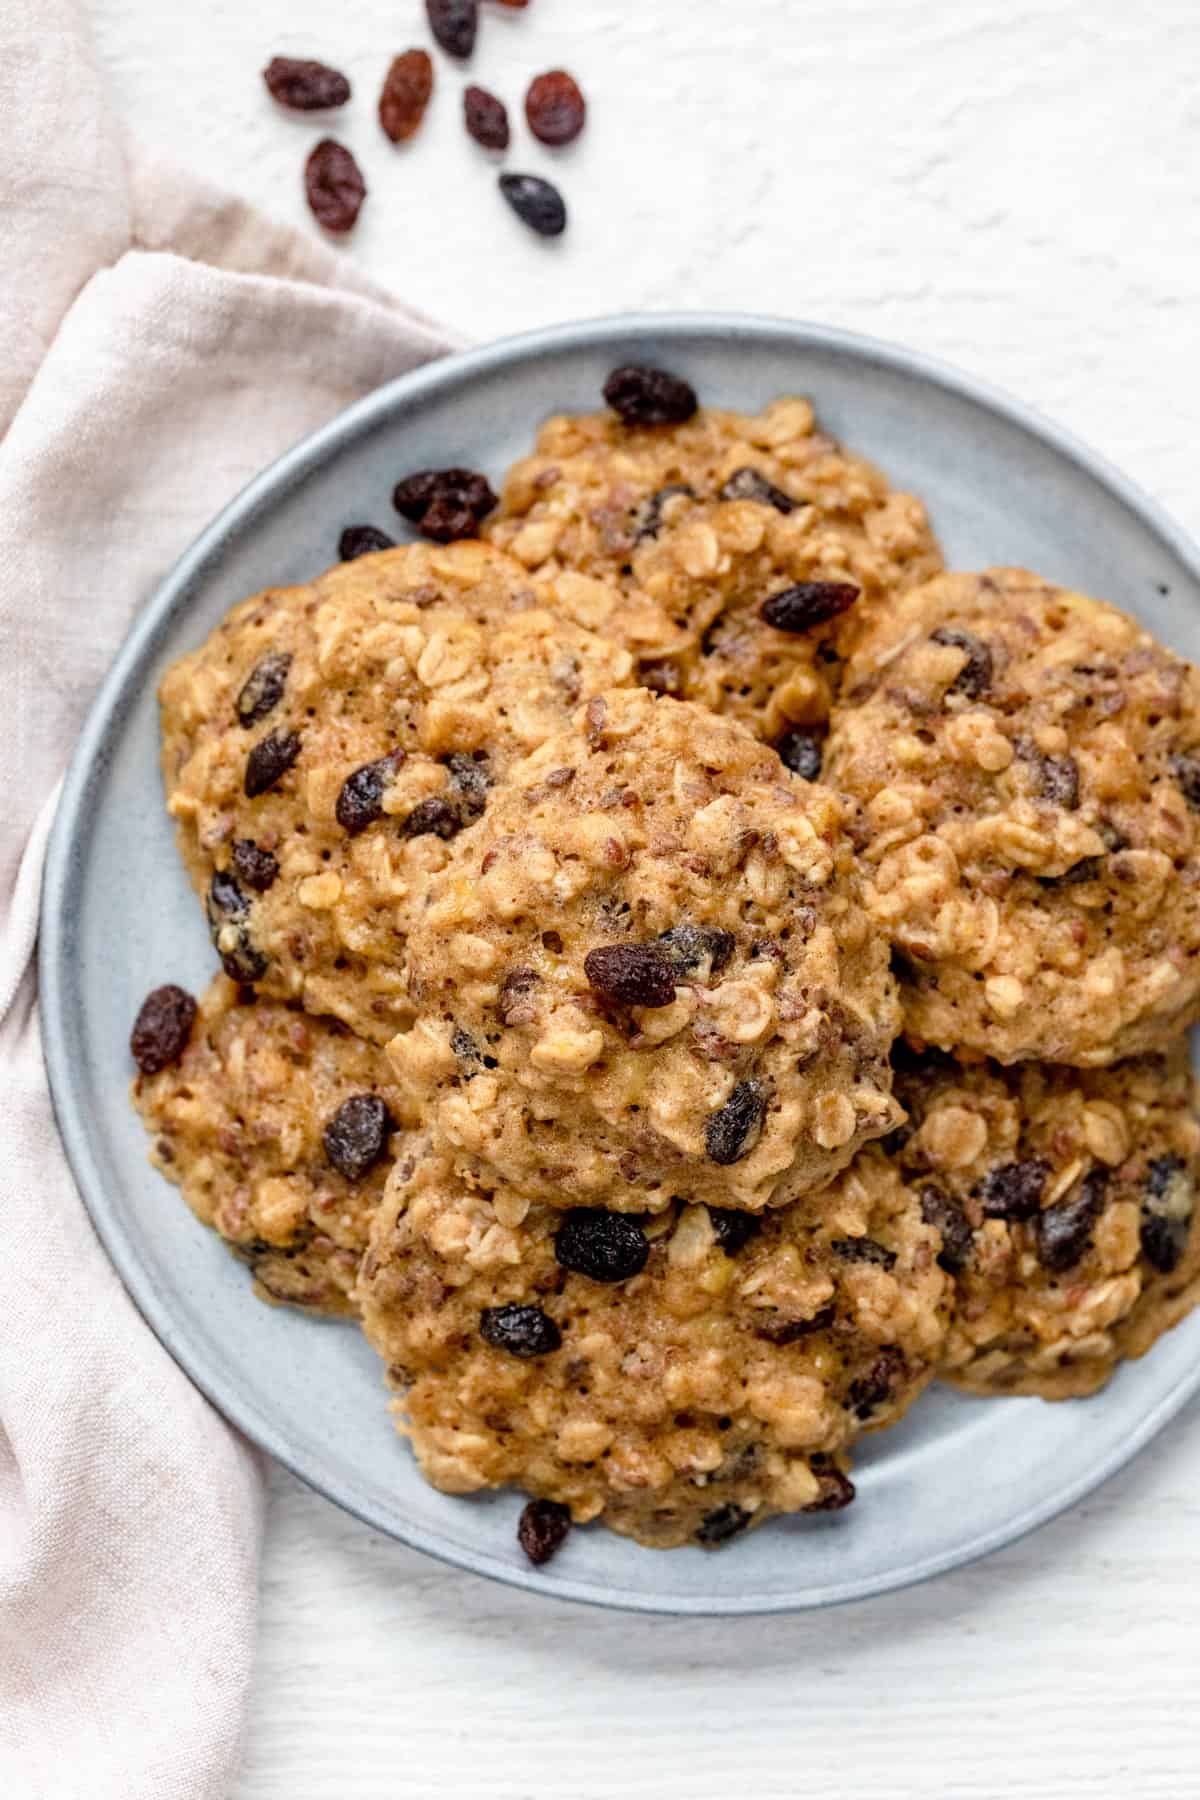 Oatmeal breakfast cookies on a plate with raisins on the side